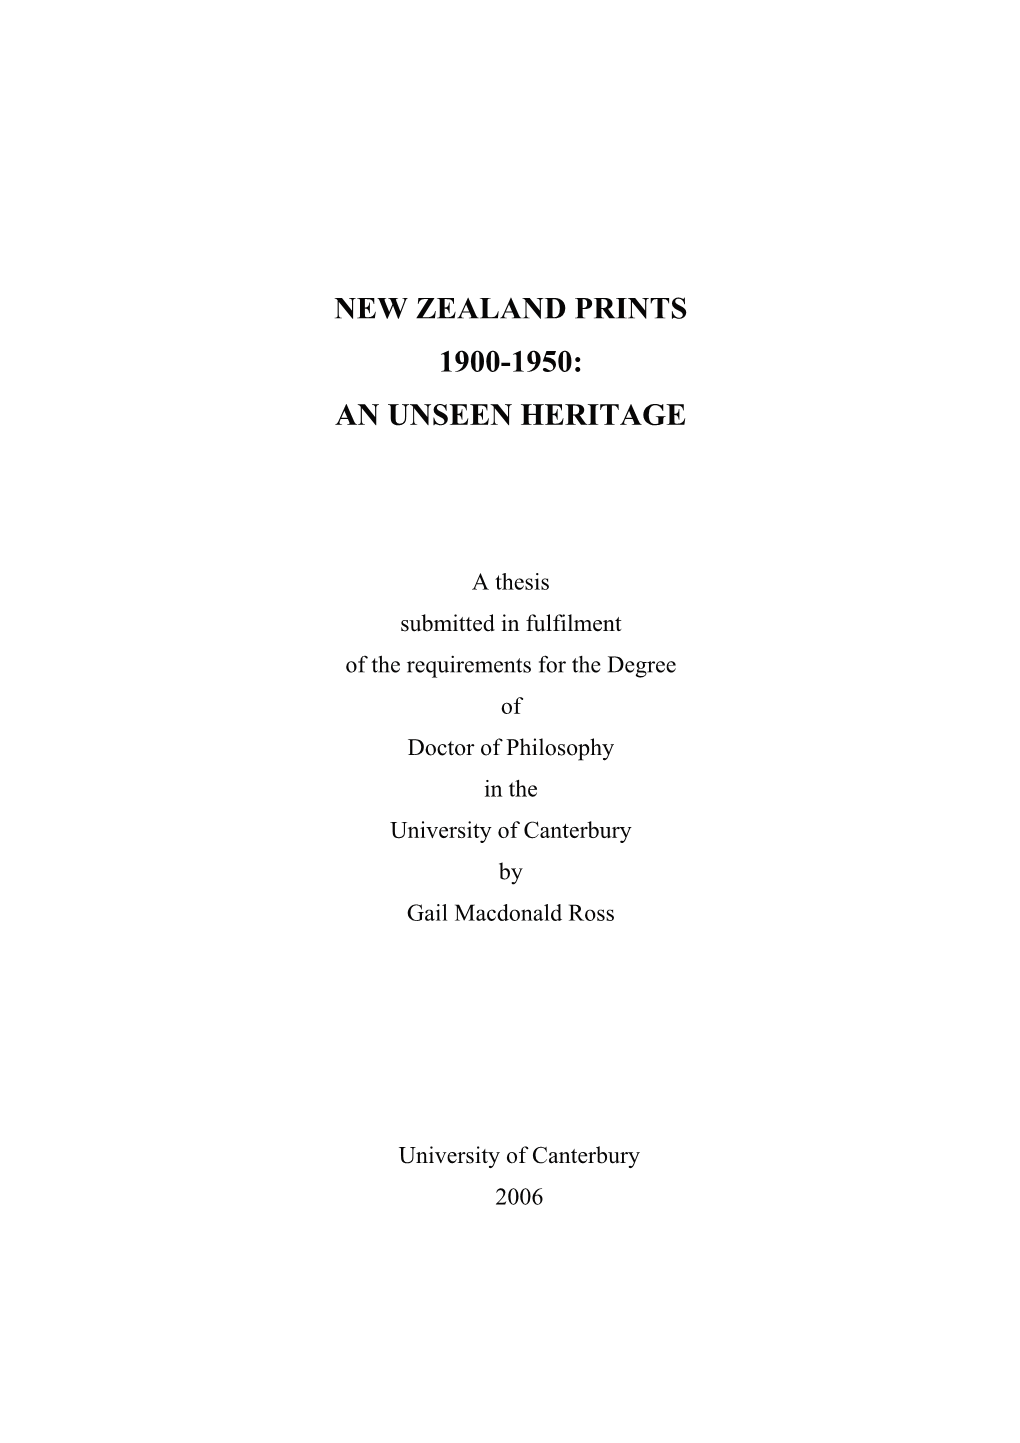 New Zealand Prints 1900-1950: an Unseen Heritage